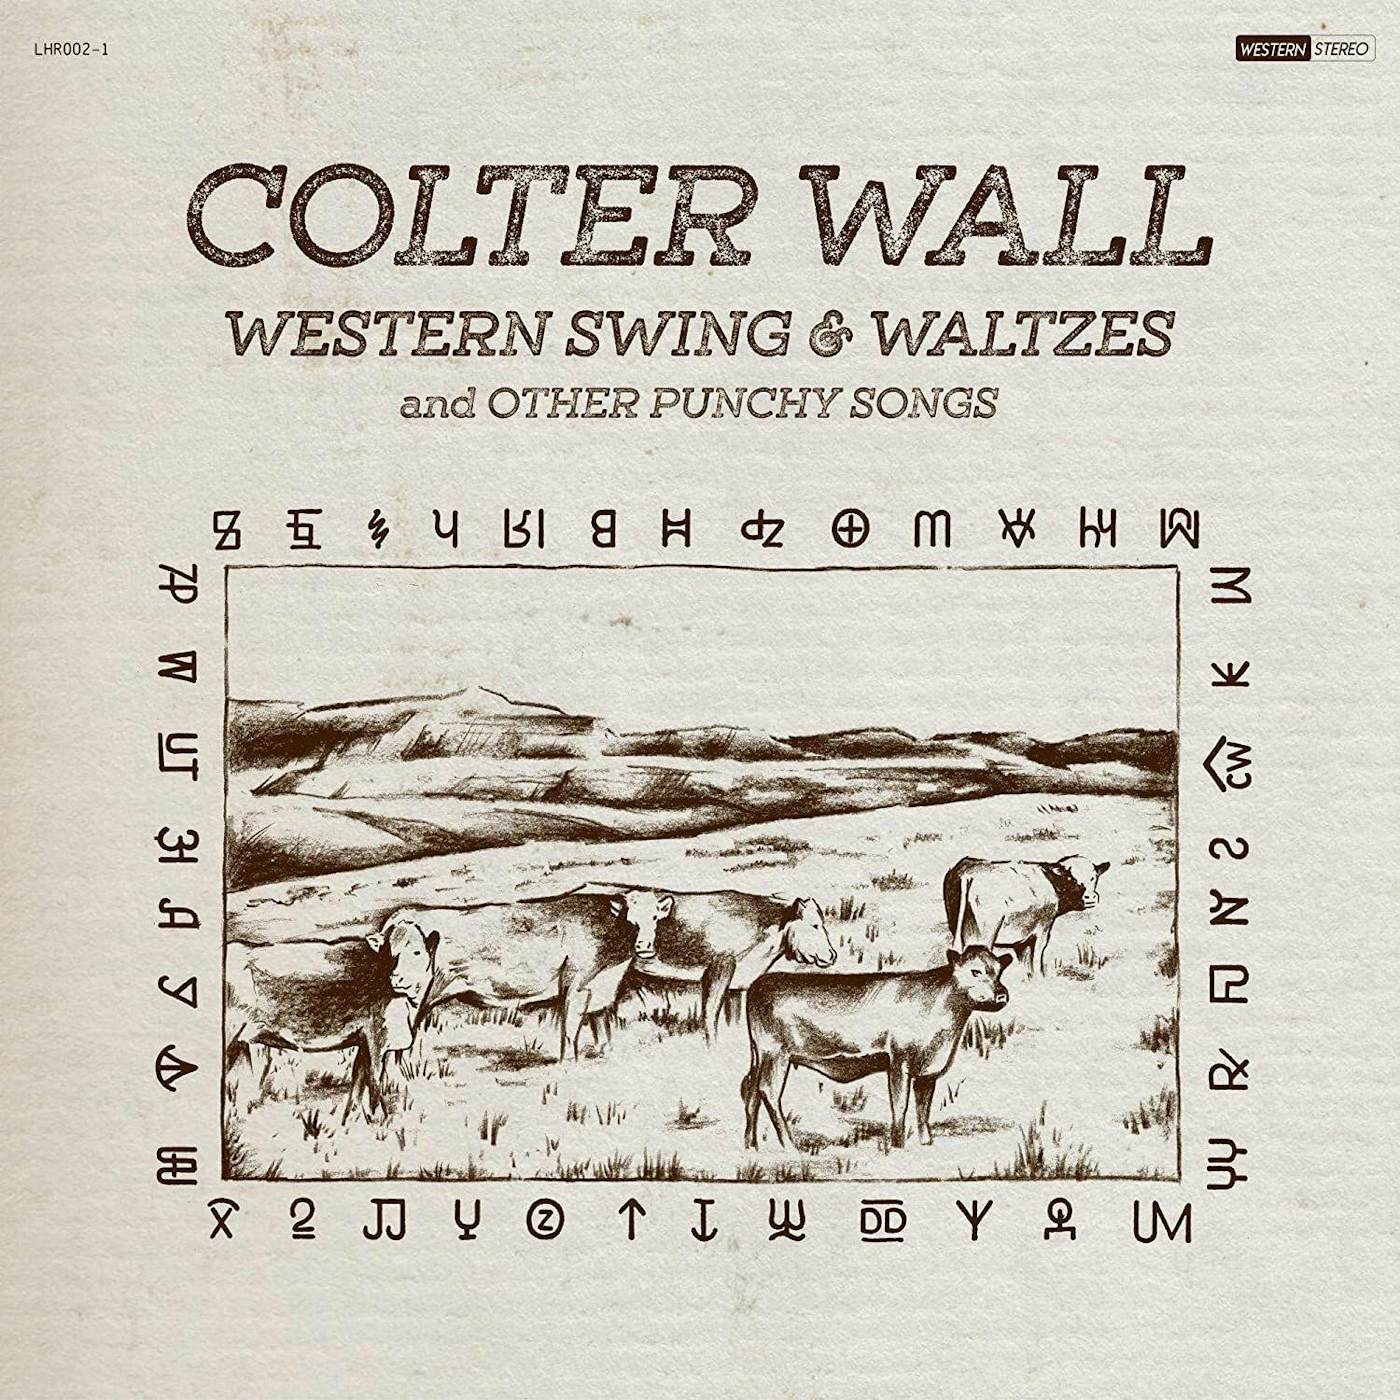 Colter Wall Western Swing & Waltzes And Other Punchy Songs Vinyl Record